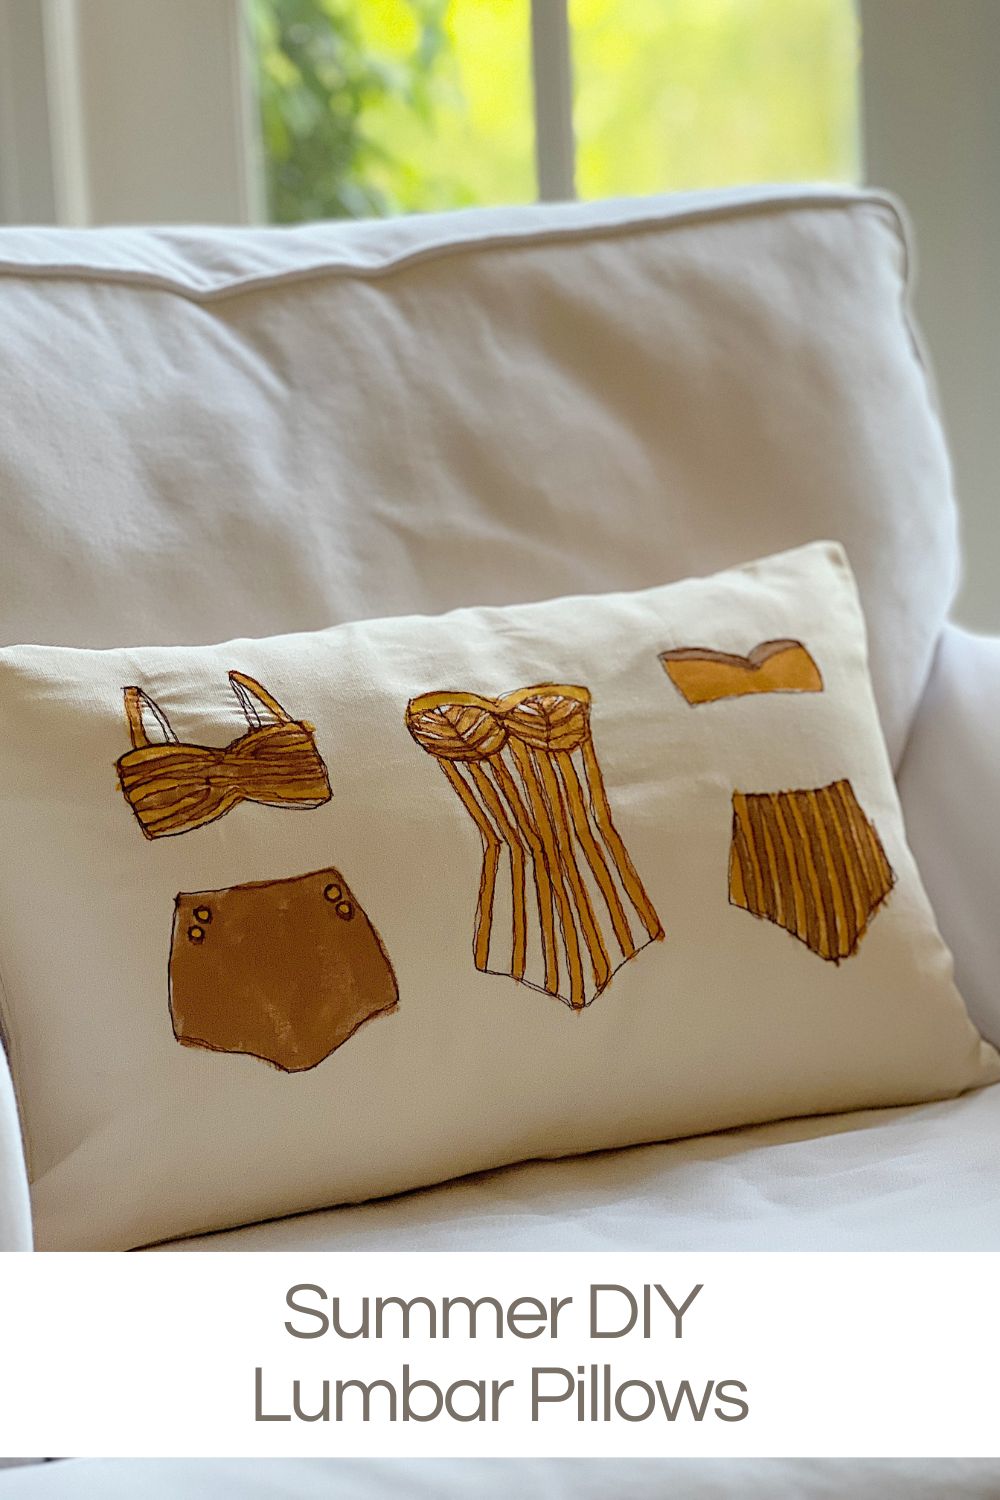 Summer is almost here, so I am sharing a super cute summer DIY with lumbar pillows inspired by my new modern coastal vintage style.